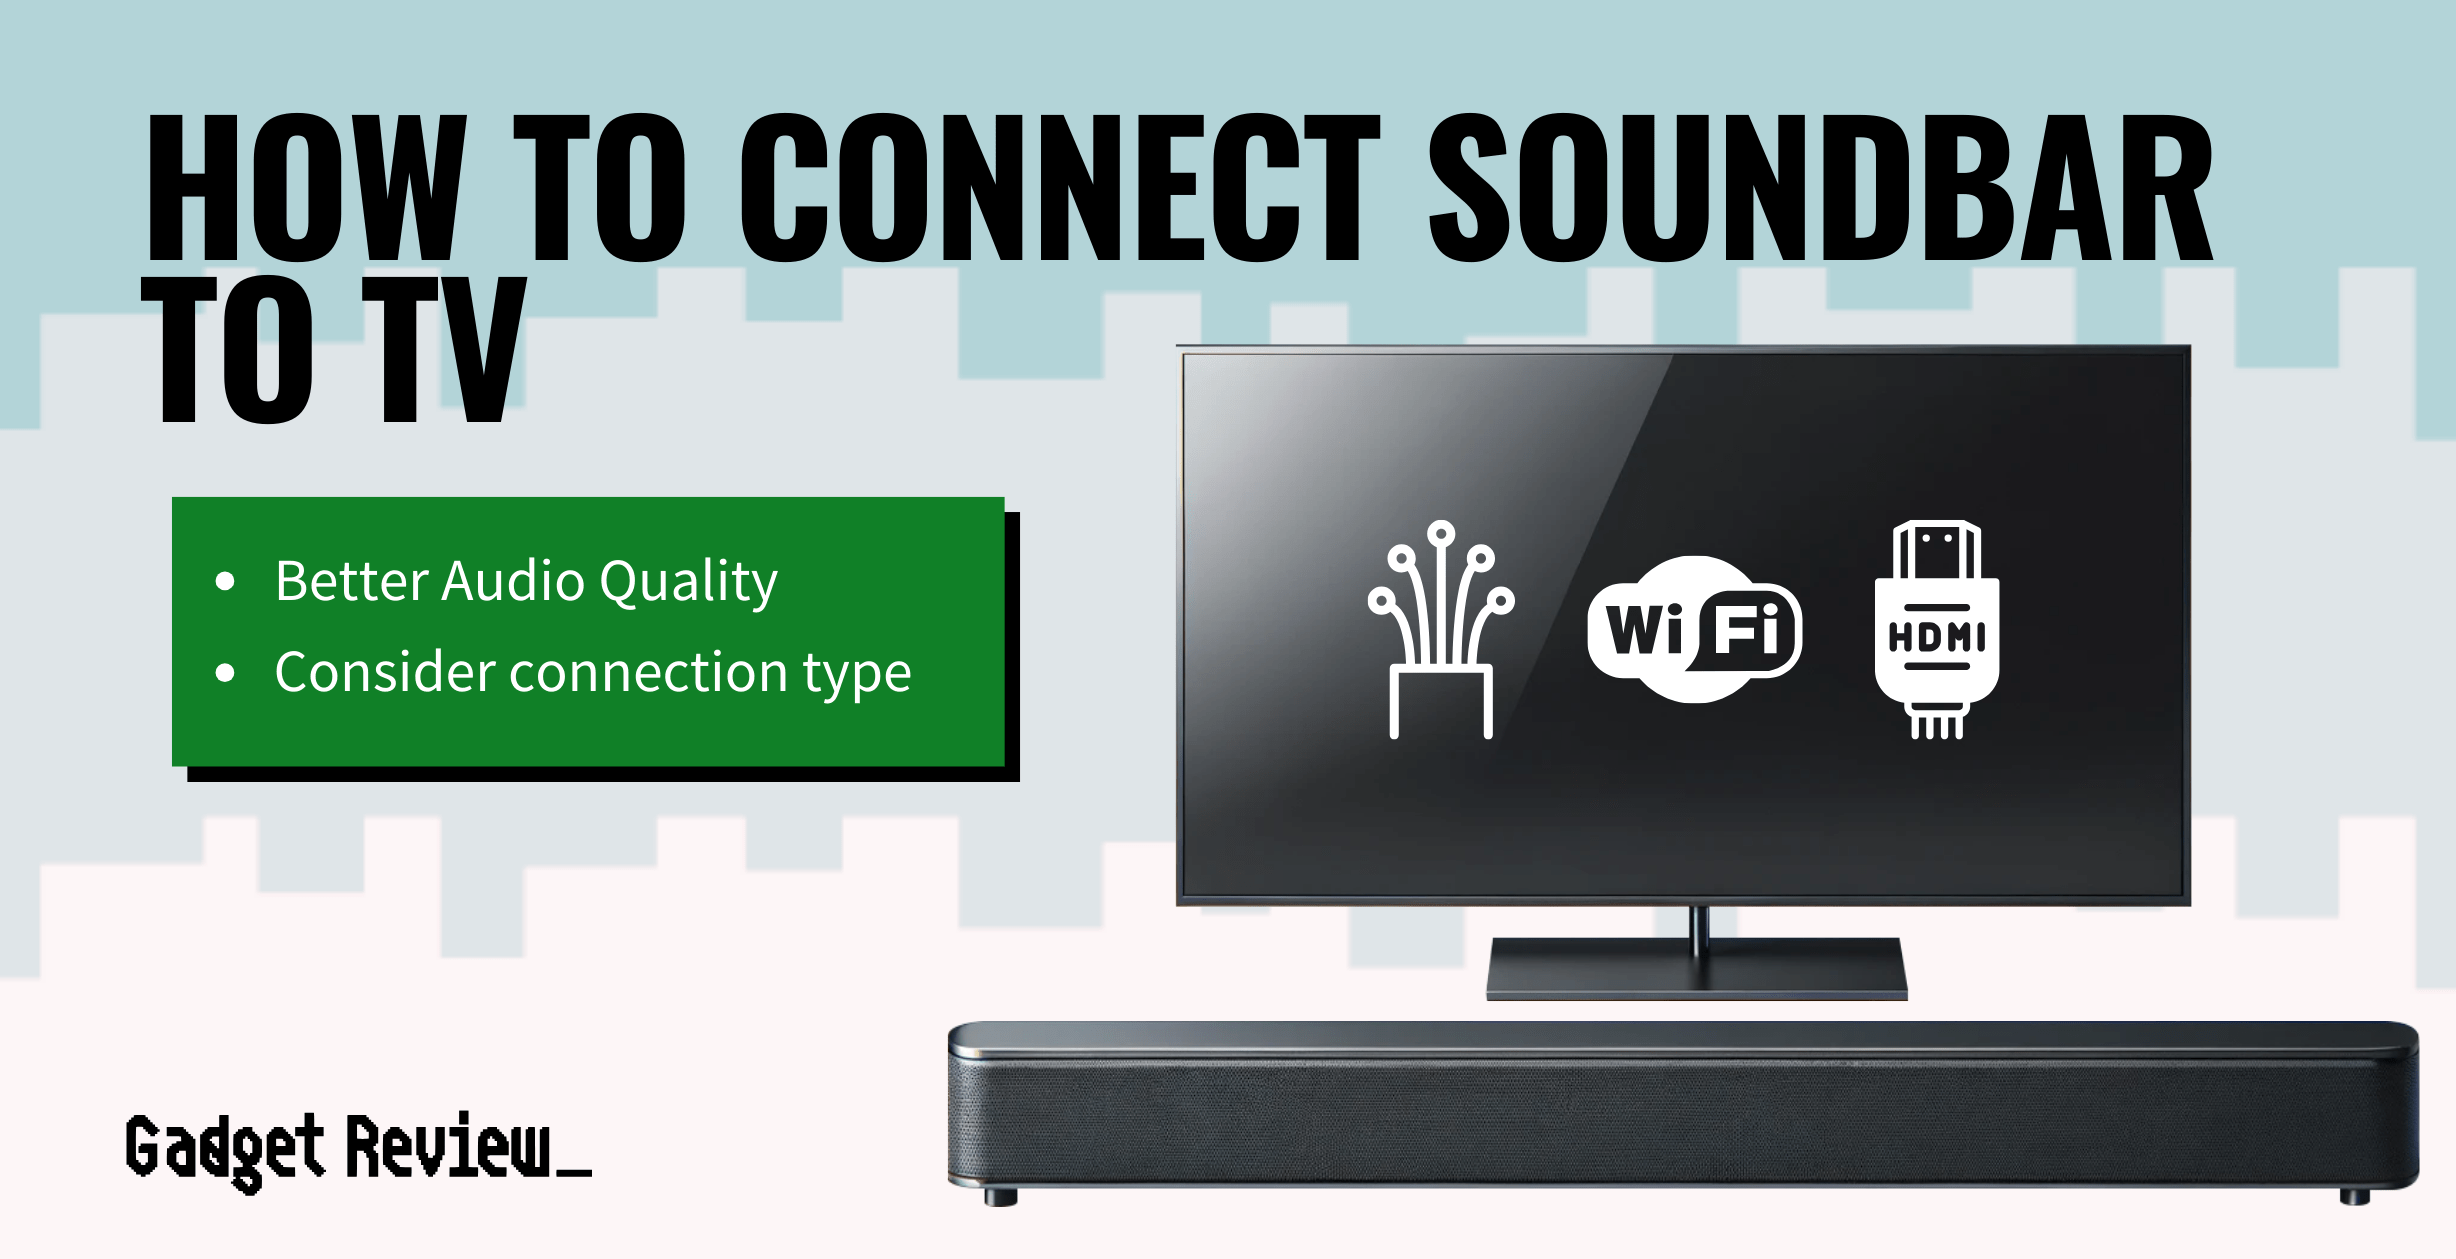 how to connect soundbar to tv guide